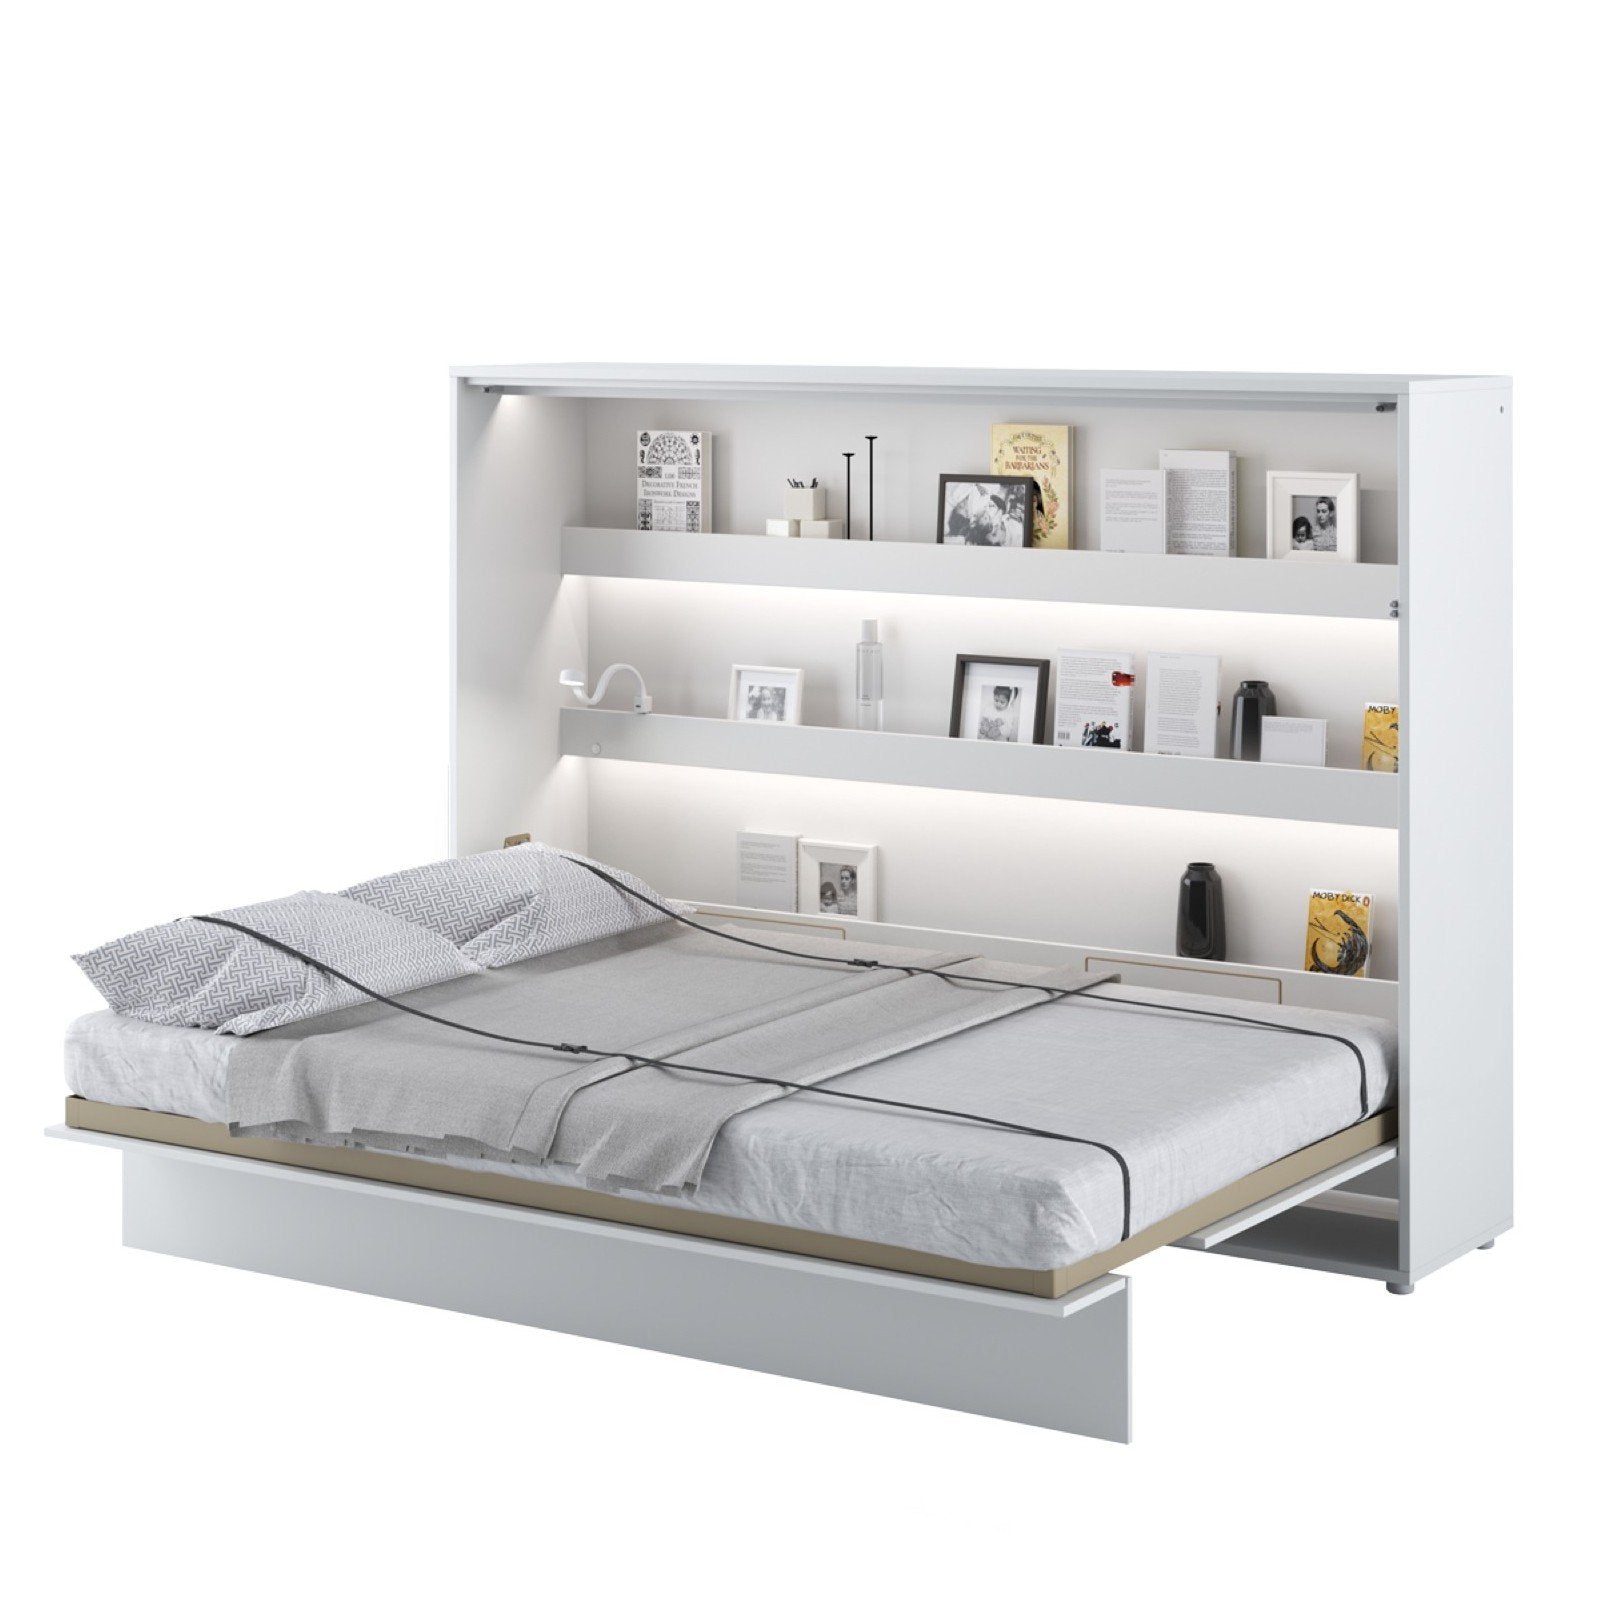 View BC04 Horizontal Wall Bed Concept 140cm Murphy Bed White Gloss 140 x 200cm information